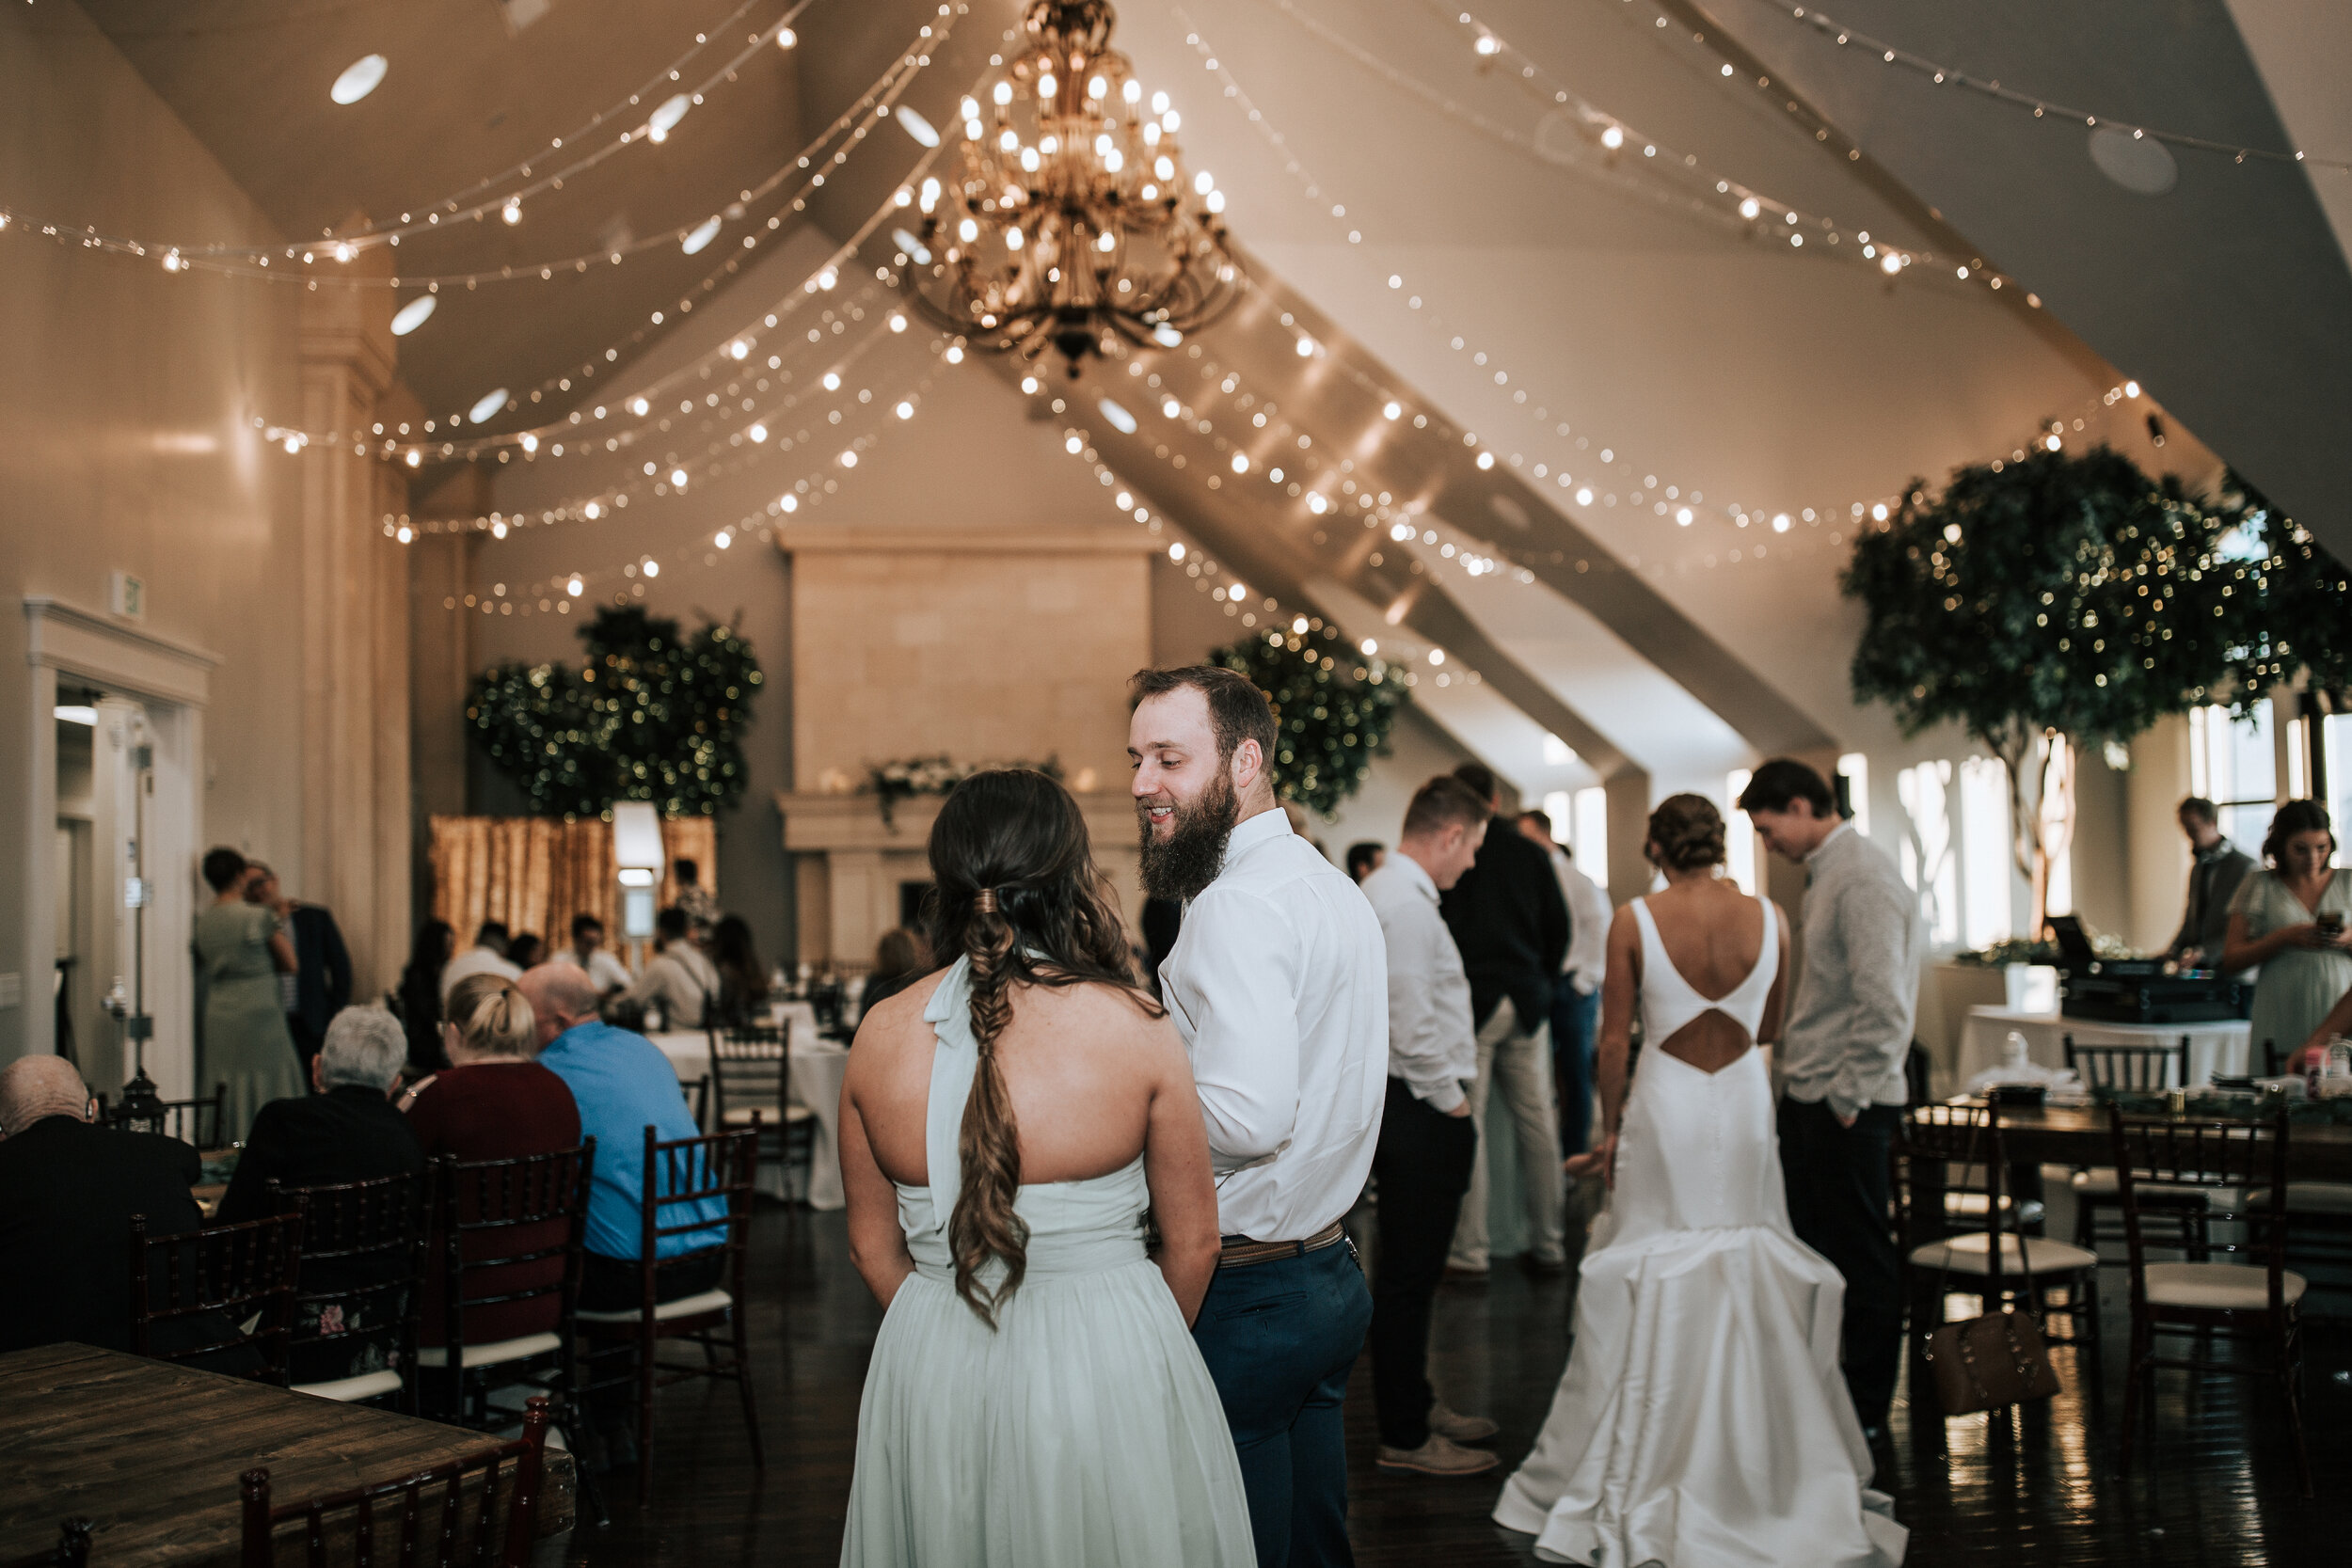  Wedding guests enjoy the party under fairy lights at Sleepy Ridge Golf Course in Orem, Utah captured by Professional wedding photographer Emily Jenkins Photography. wedding guest detail shot indoor utah county wedding venue #emilyjenkinsphotography 